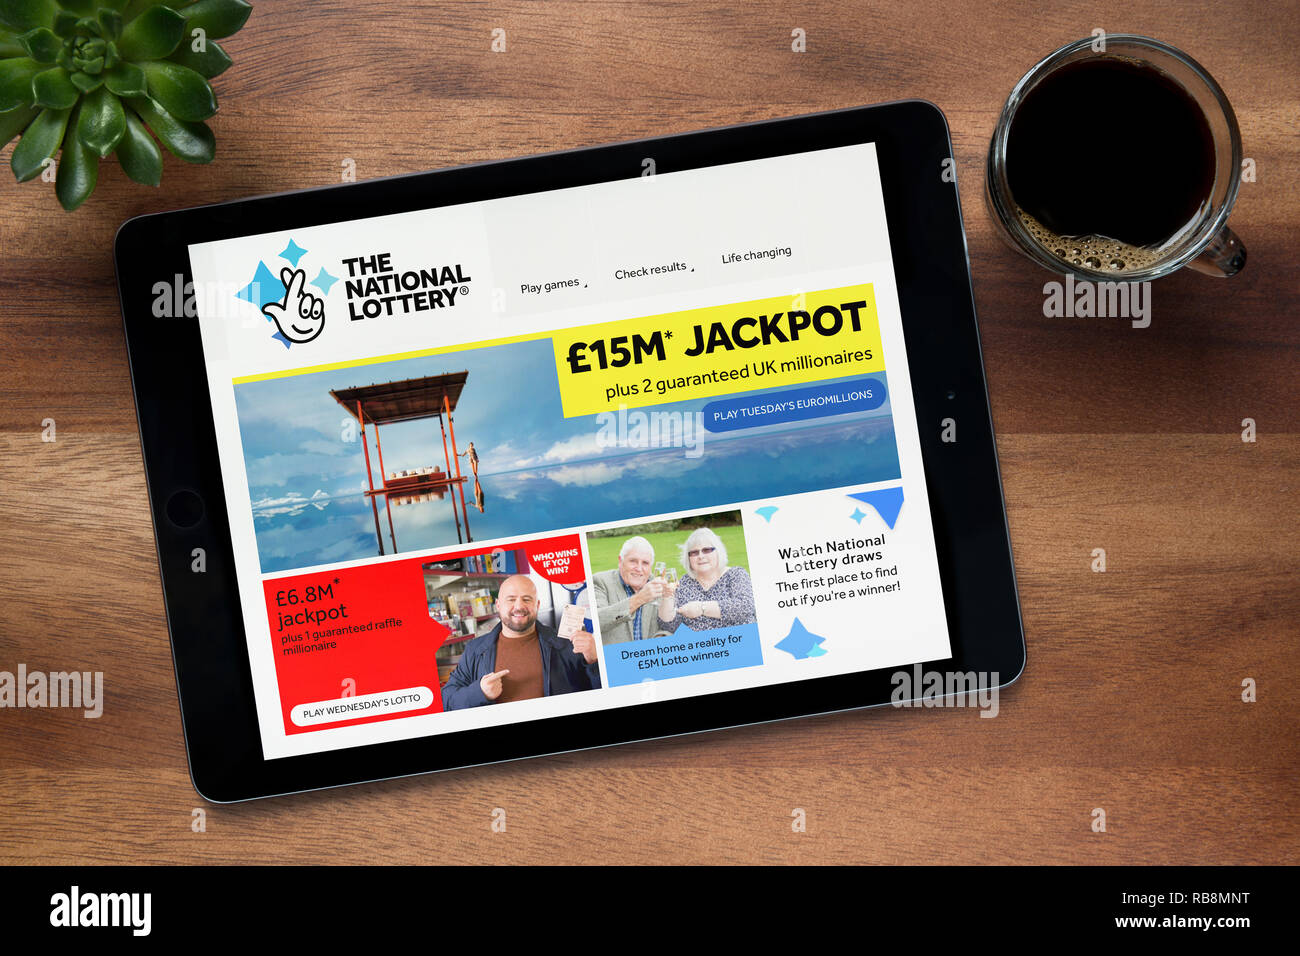 The website of The National Lottery is seen on an iPad tablet, on a wooden table along with an espresso coffee and a house plant (Editorial use only). Stock Photo